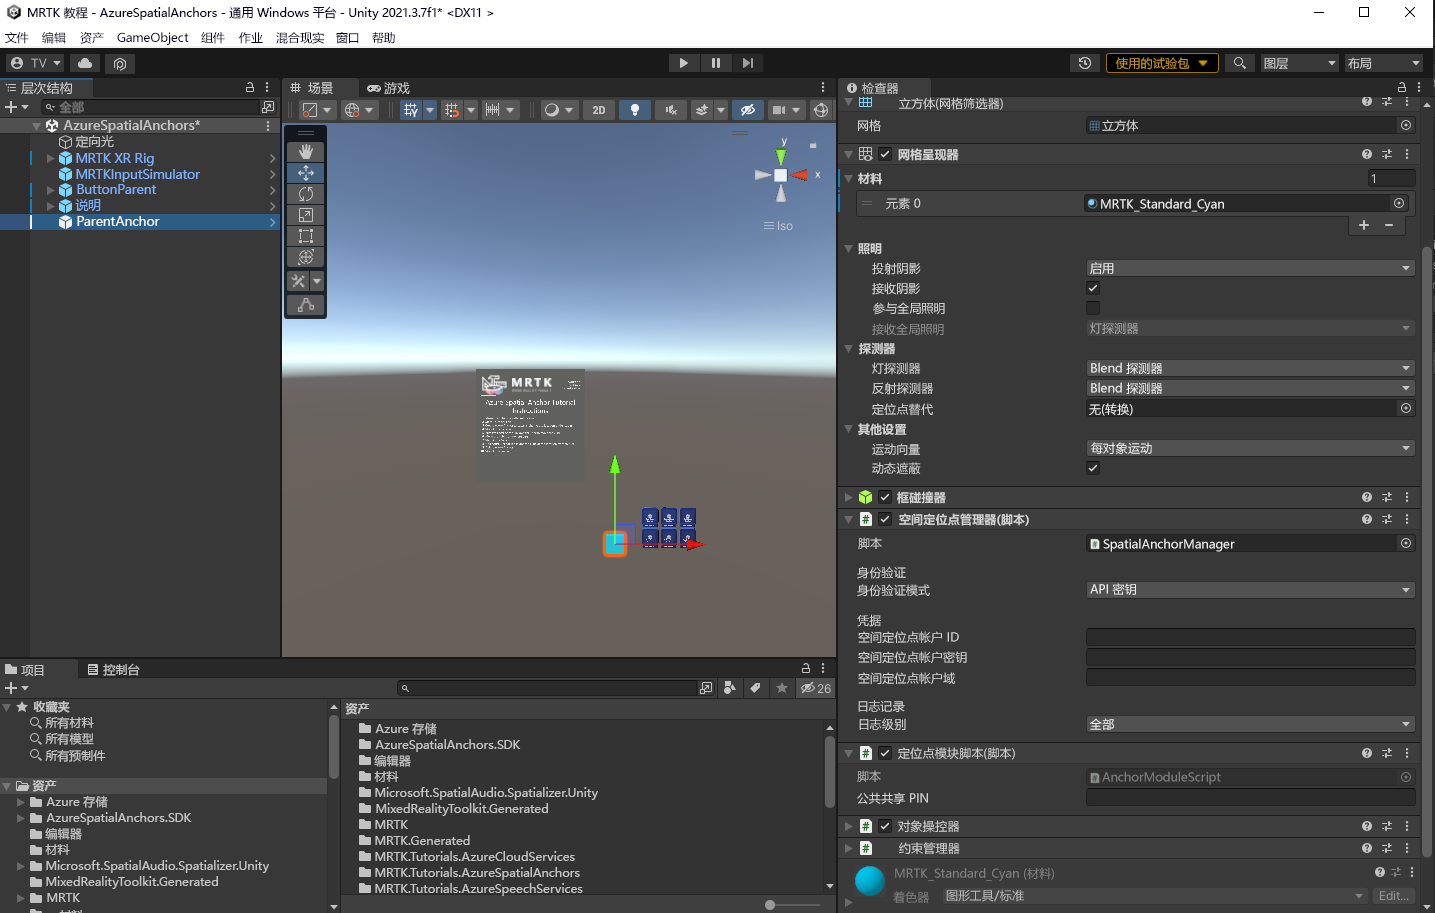 Screenshot of Unity with the Spatial Anchor Manager configured.